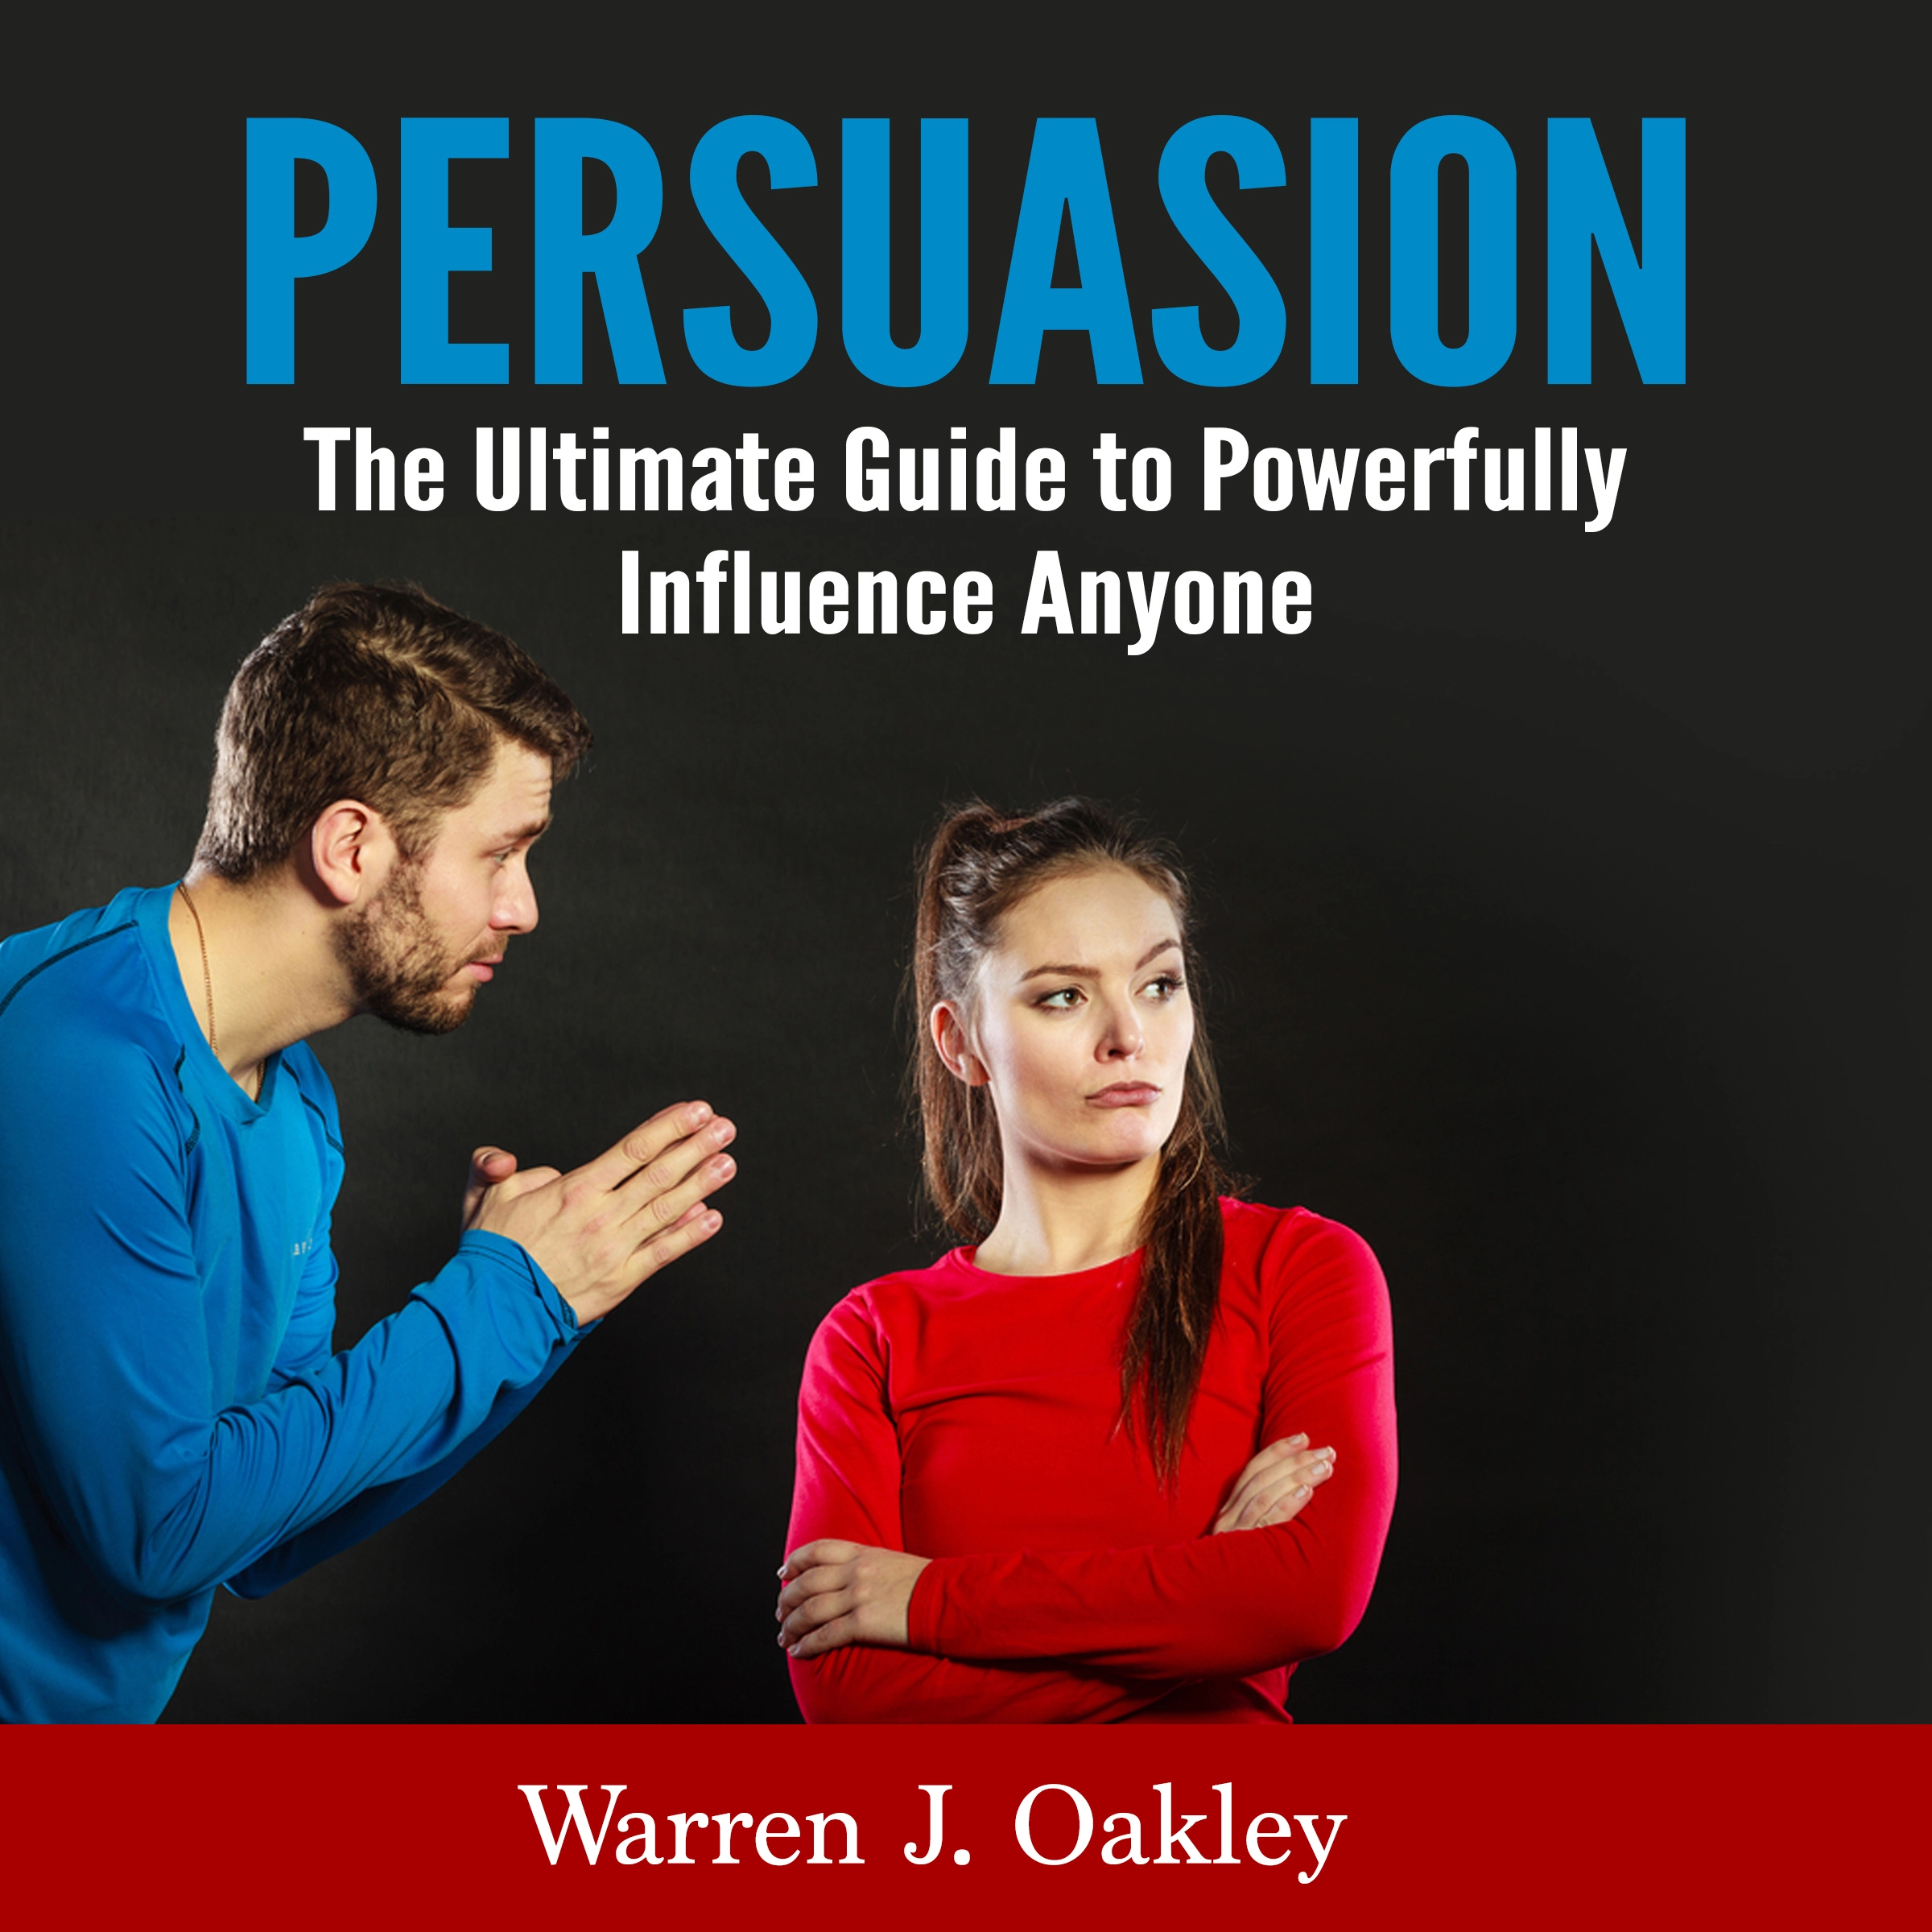 Persuasion: The Ultimate Guide to Powerfully Influence Anyone Audiobook by Warren J. Oakley